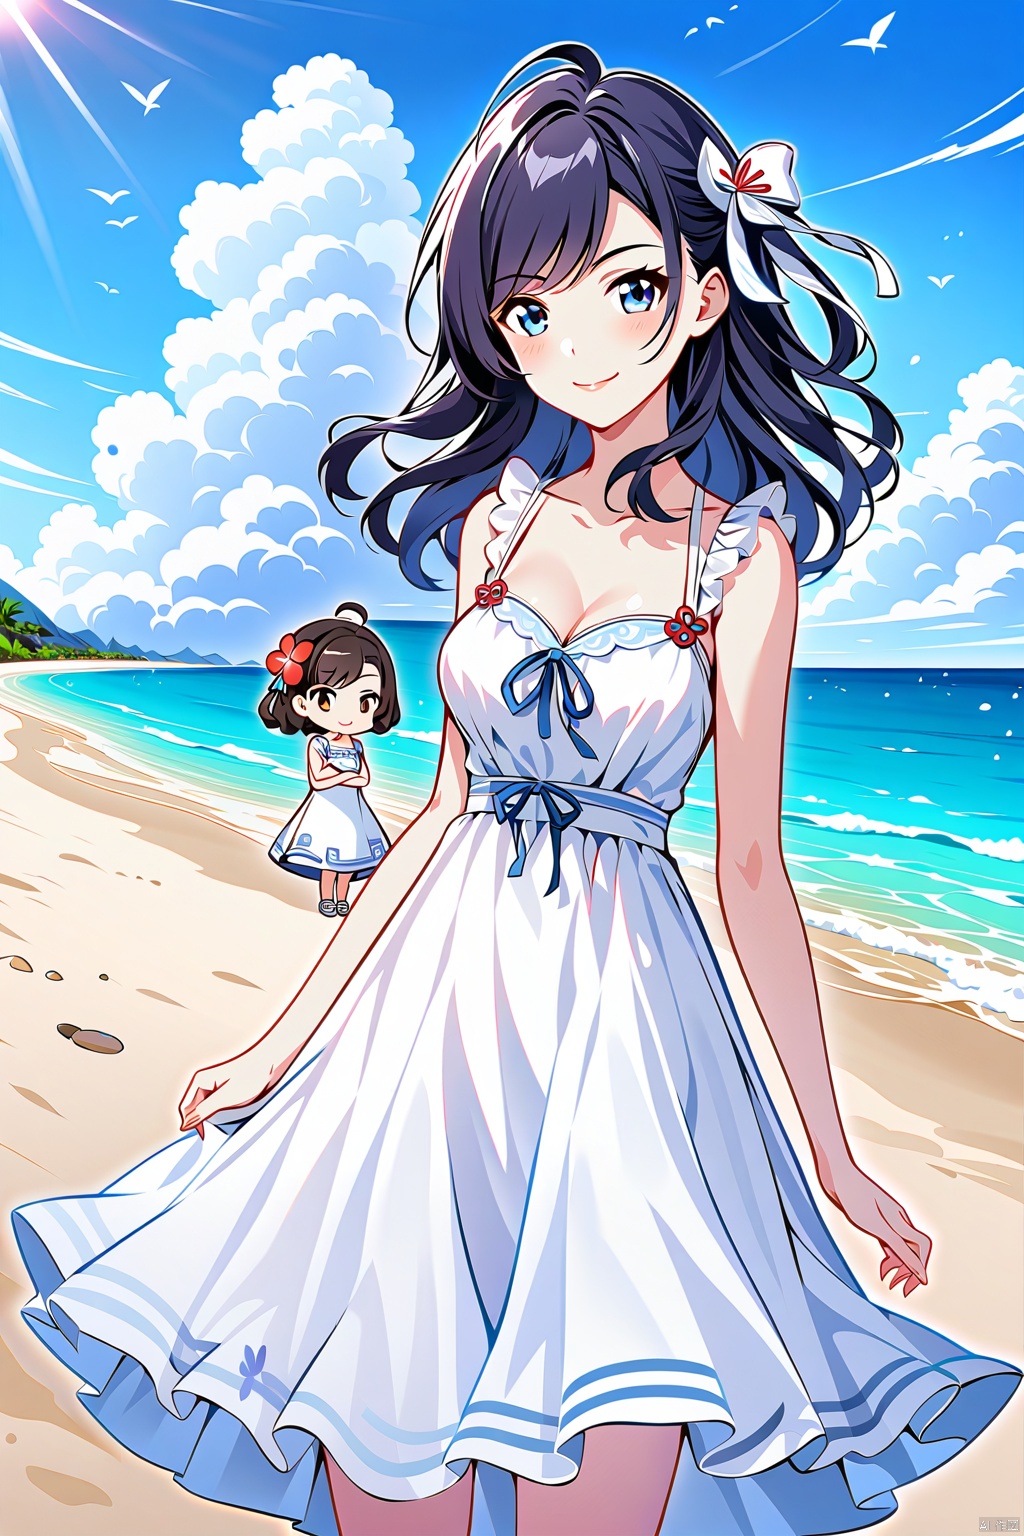  1girl, solo, dress, flower, long_hair, looking_at_viewer, white_dress, bangs, ahoge, short_sleeves, outdoors, closed_mouth, hair_between_eyes, sky, spider_lily, breasts, ribbon, pink_hair, purple_eyes, day, medium_breasts, sailor_dress, cloud, blue_sky, sailor_collar, blurry_foreground, red_flower, blurry, blush, hair_ribbon, bug, jiqing, babata, maolilan, (\MBTI\),maolilan,1girl,long hair,breasts,looking at viewer,smile,blue eyes,brown hair,dress,medium breasts,collarbone,outdoors,sky,cloud,dark skin,water,white dress,blue sky,sleeveless dress,ocean,beach,sand,sun,sundress
, 1 girl, (\shen ming shao nv\), Anne Hathaway, tr mini style